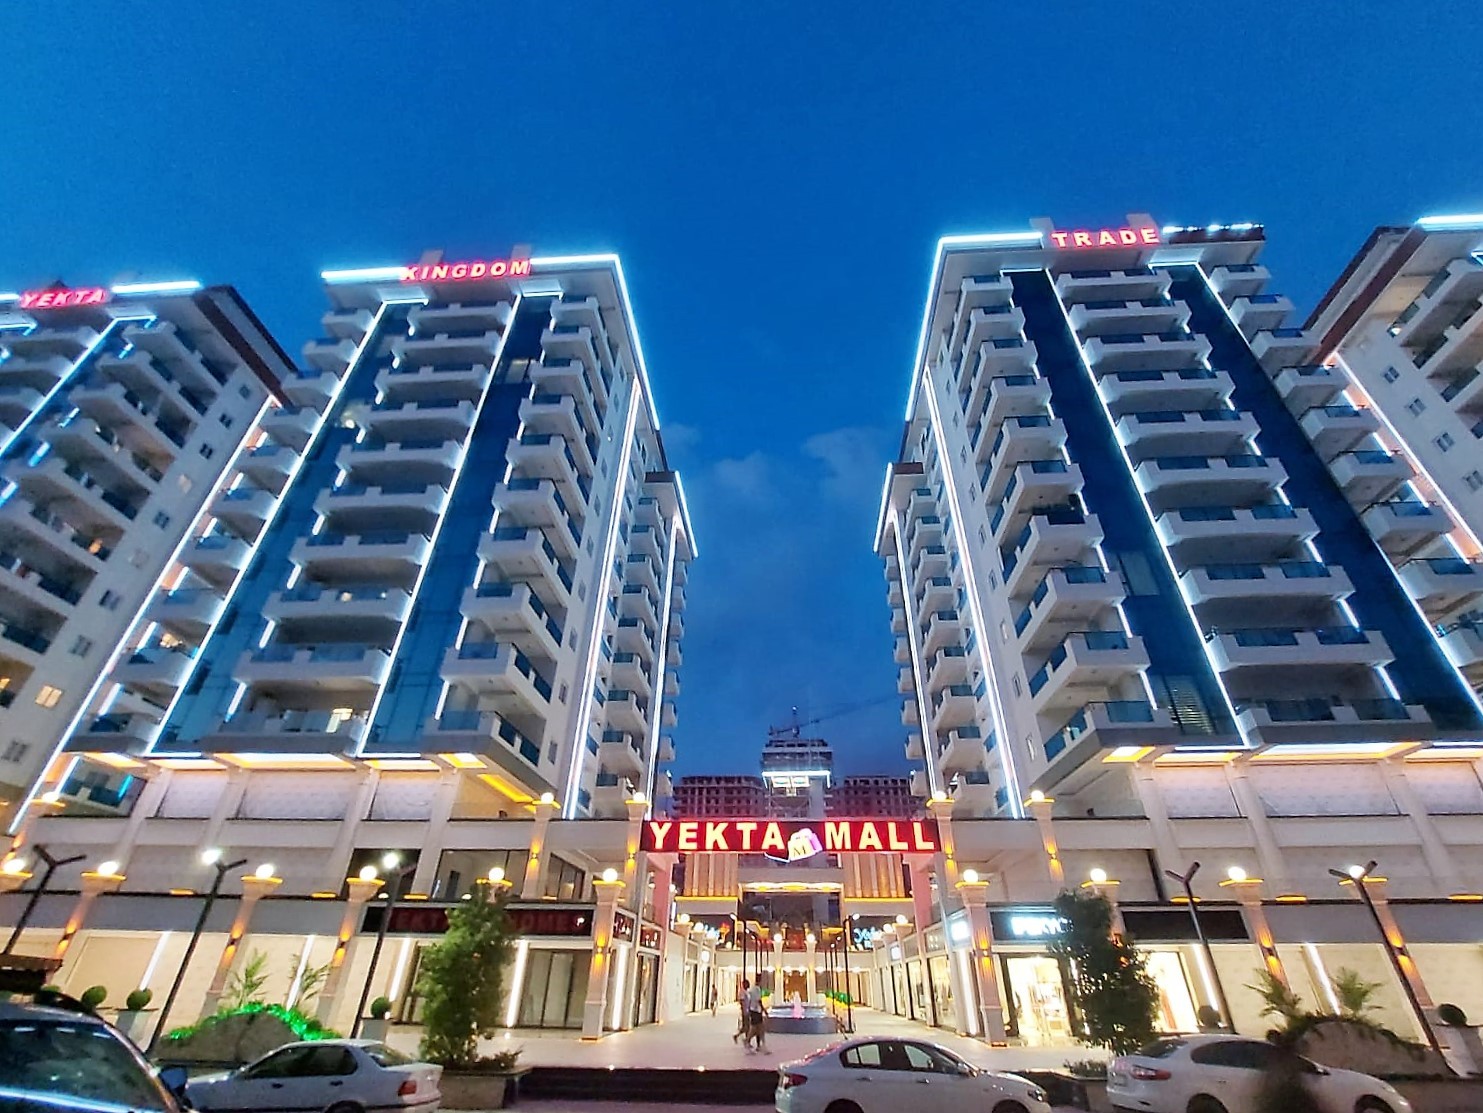 Elite three-room duplex apartment in the YEKTA KINGDOM TRADE CENTER complex with the infrastructure of a 5 * hotel in the center of Alanya - Mahmutlar